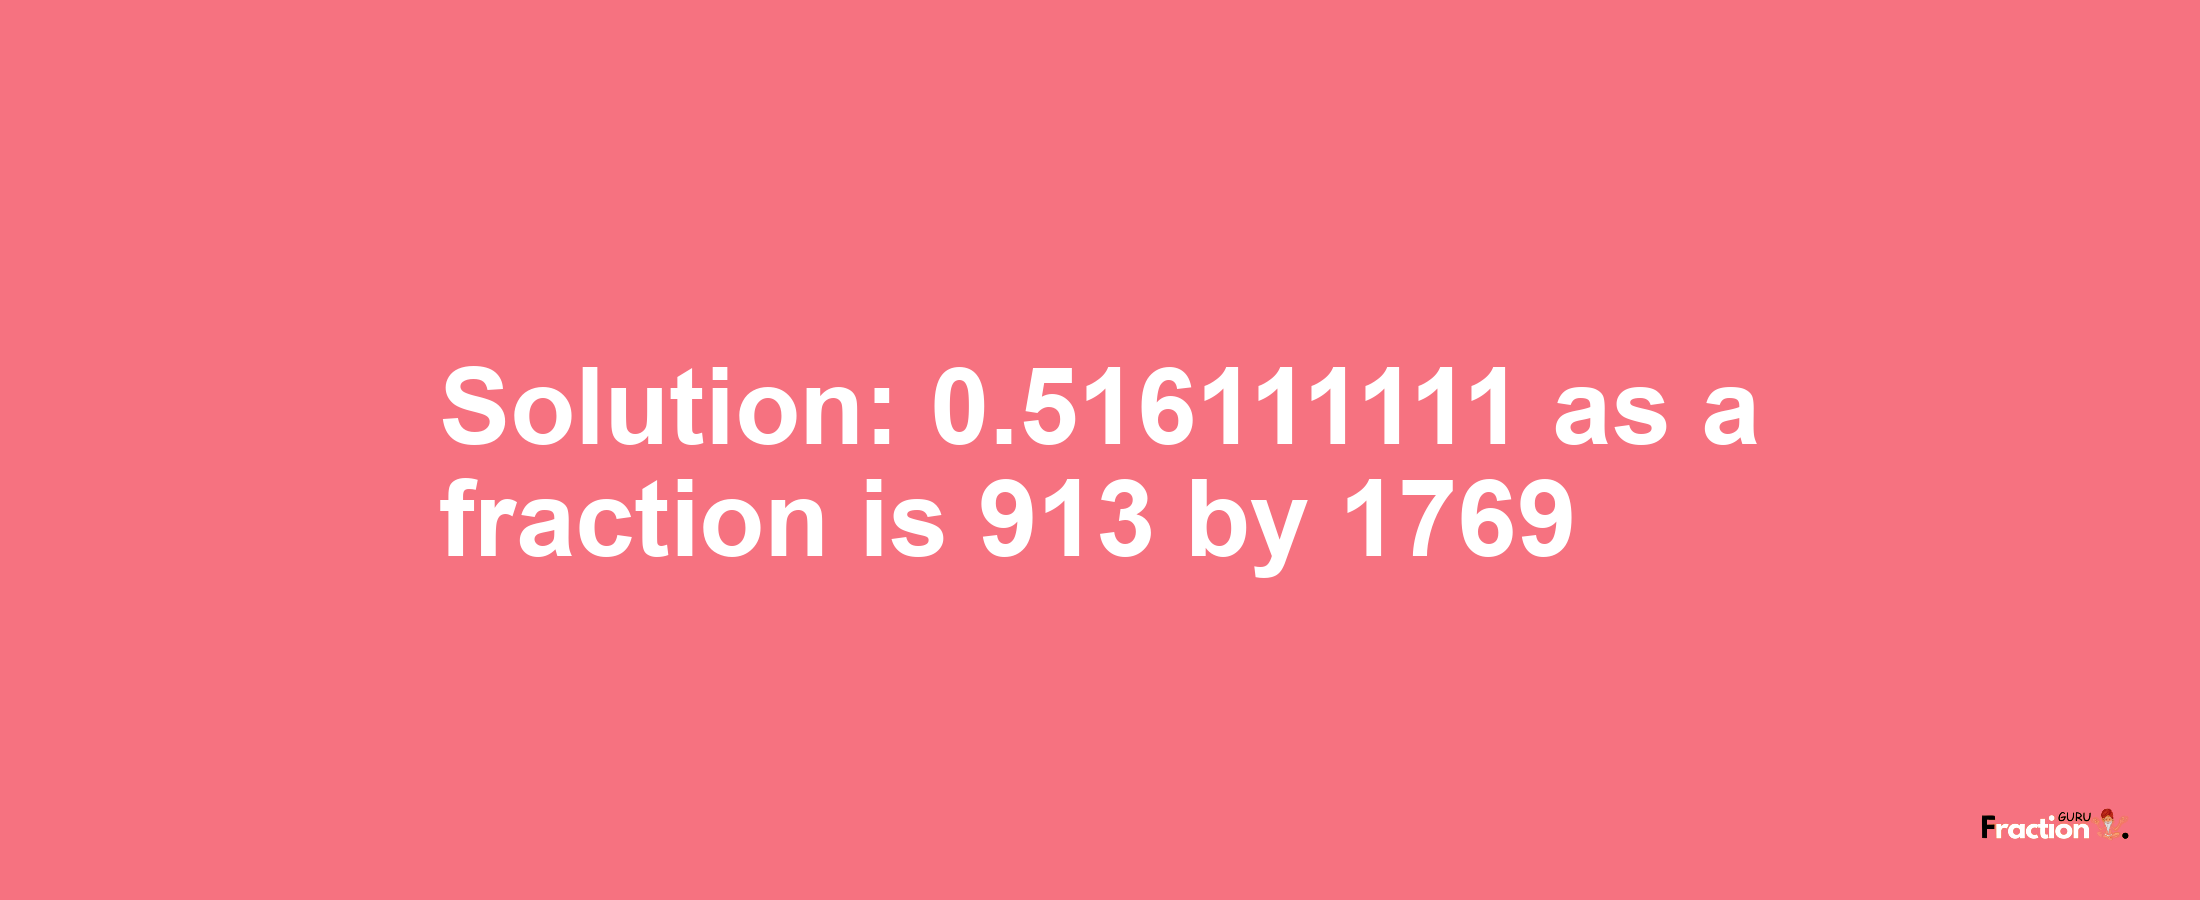 Solution:0.516111111 as a fraction is 913/1769